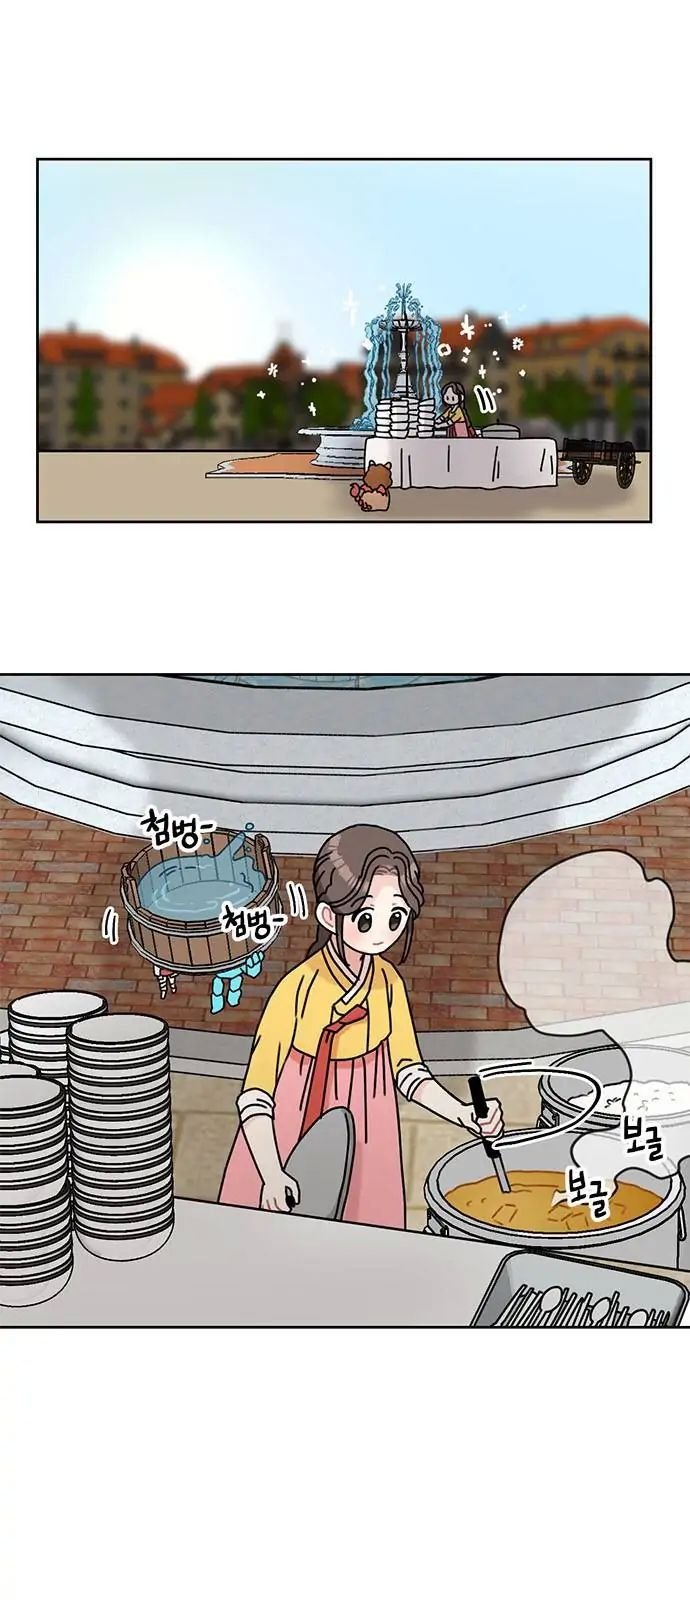 I Became the Chef of the Dragon King chapter 36